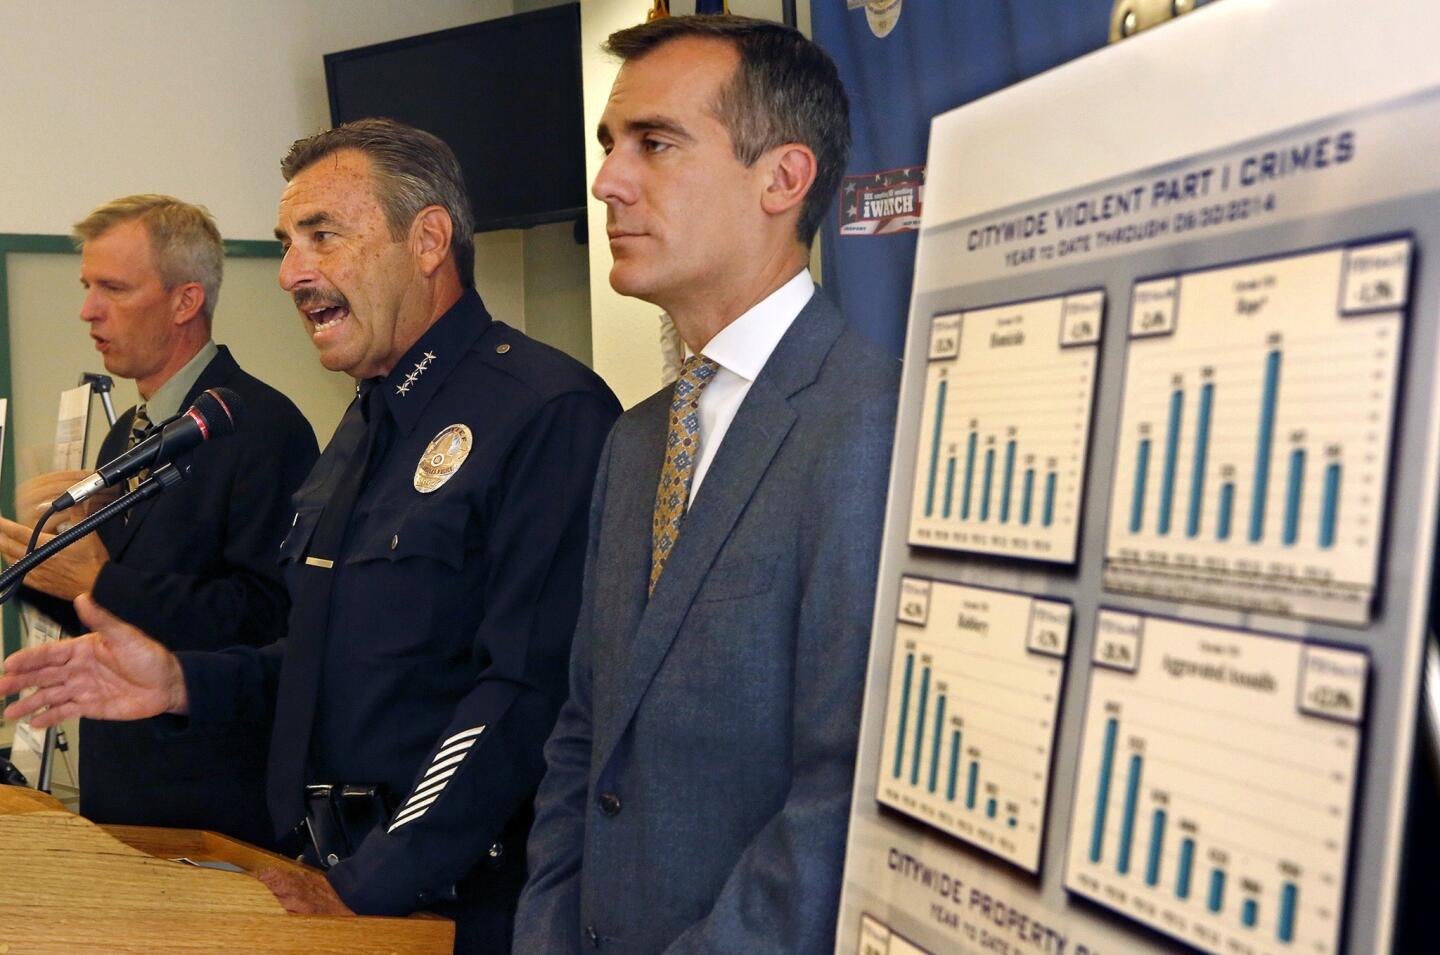 Los Angeles Police Chief Charlie Beck, center, and Los Angeles Mayor Eric Garcetti, right, address the media while announcing midyear crime statistics during a news conference at the 77th Street Police Station in South Los Angeles on July 9.